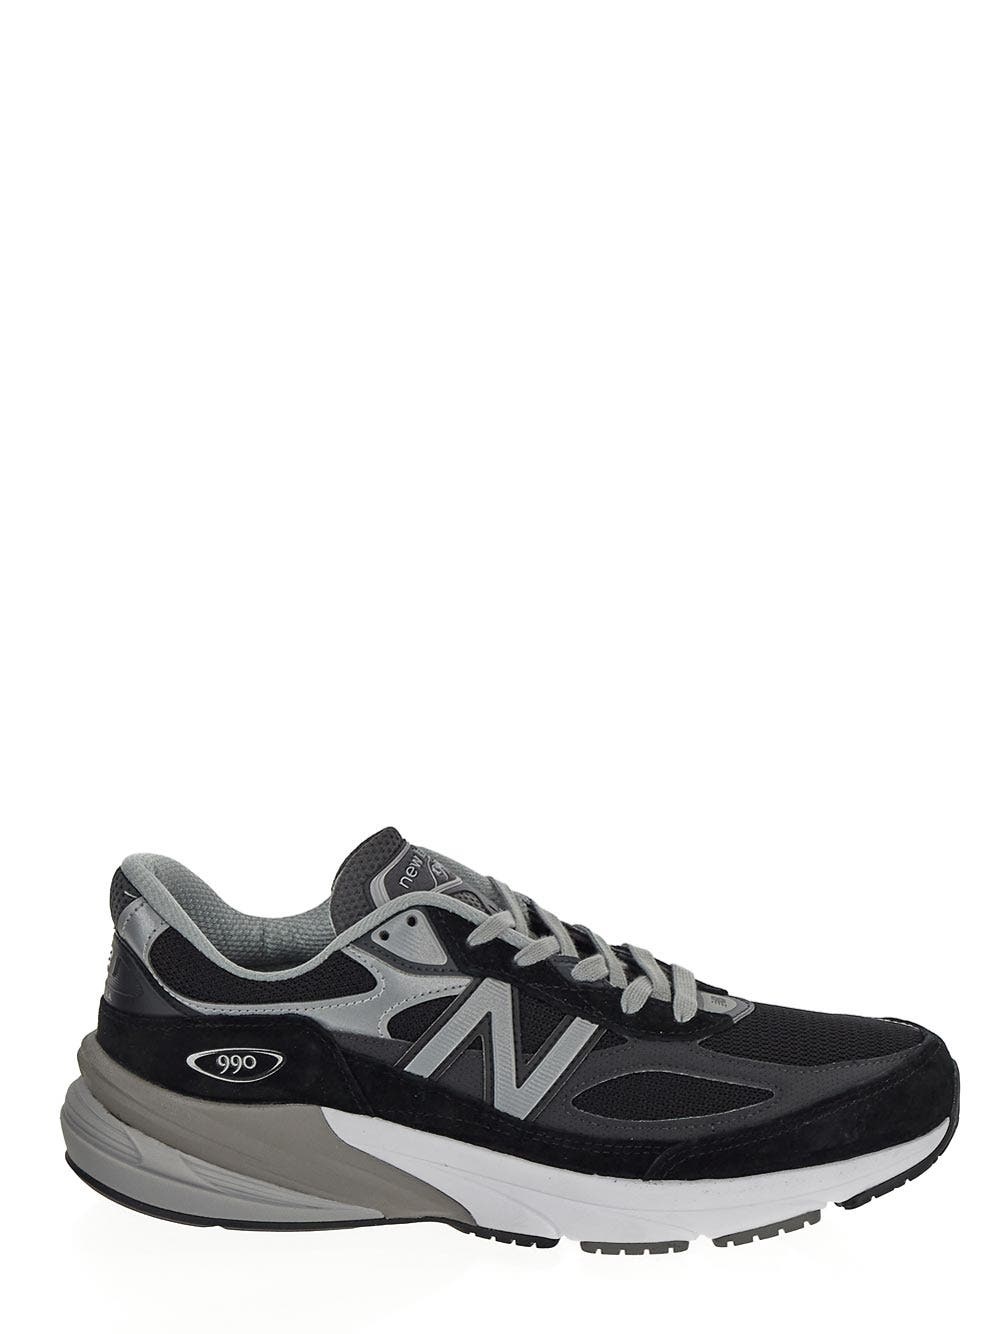 990v6 Trainers - 1